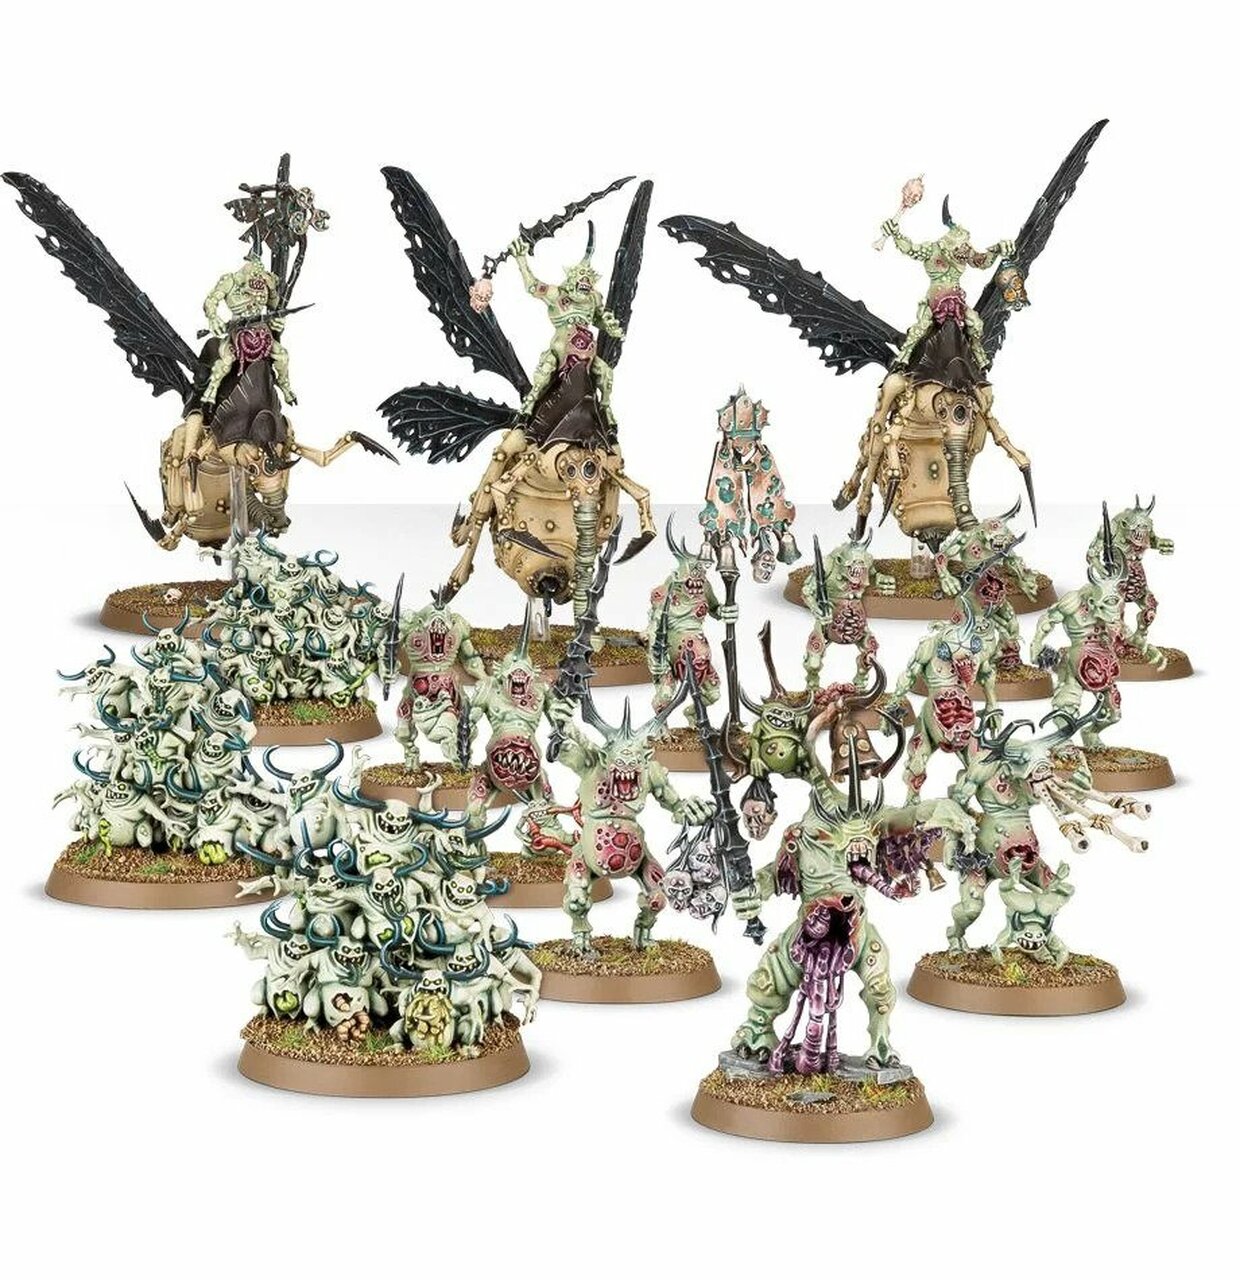 AOS - Age of Sigmar: Start Collecting Daemons of Nurgle